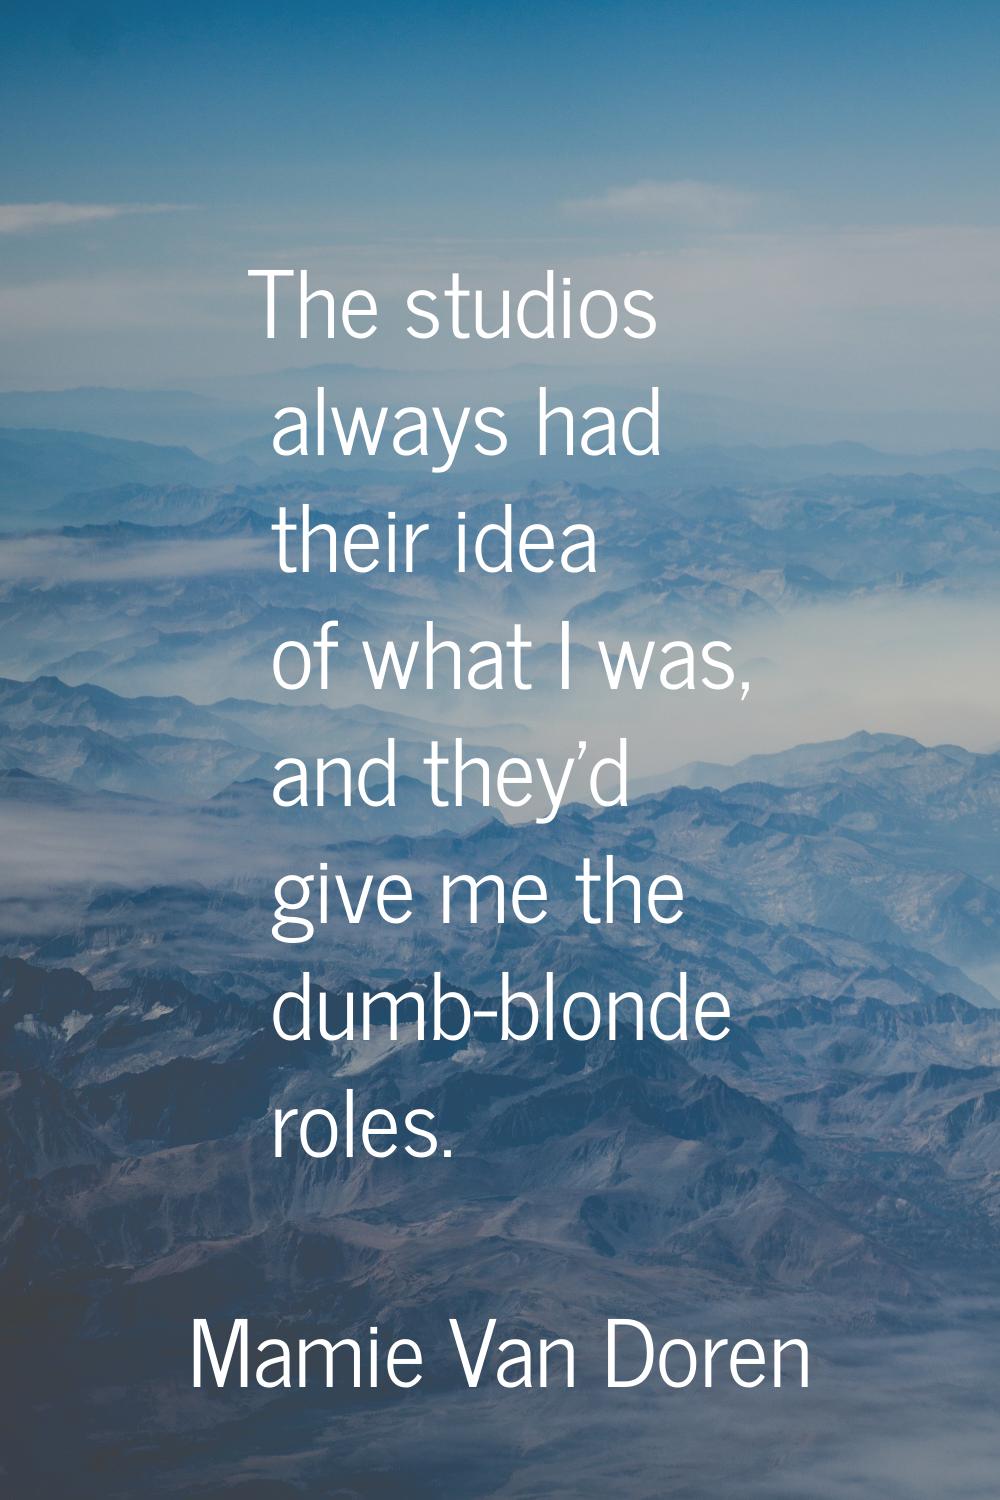 The studios always had their idea of what I was, and they'd give me the dumb-blonde roles.